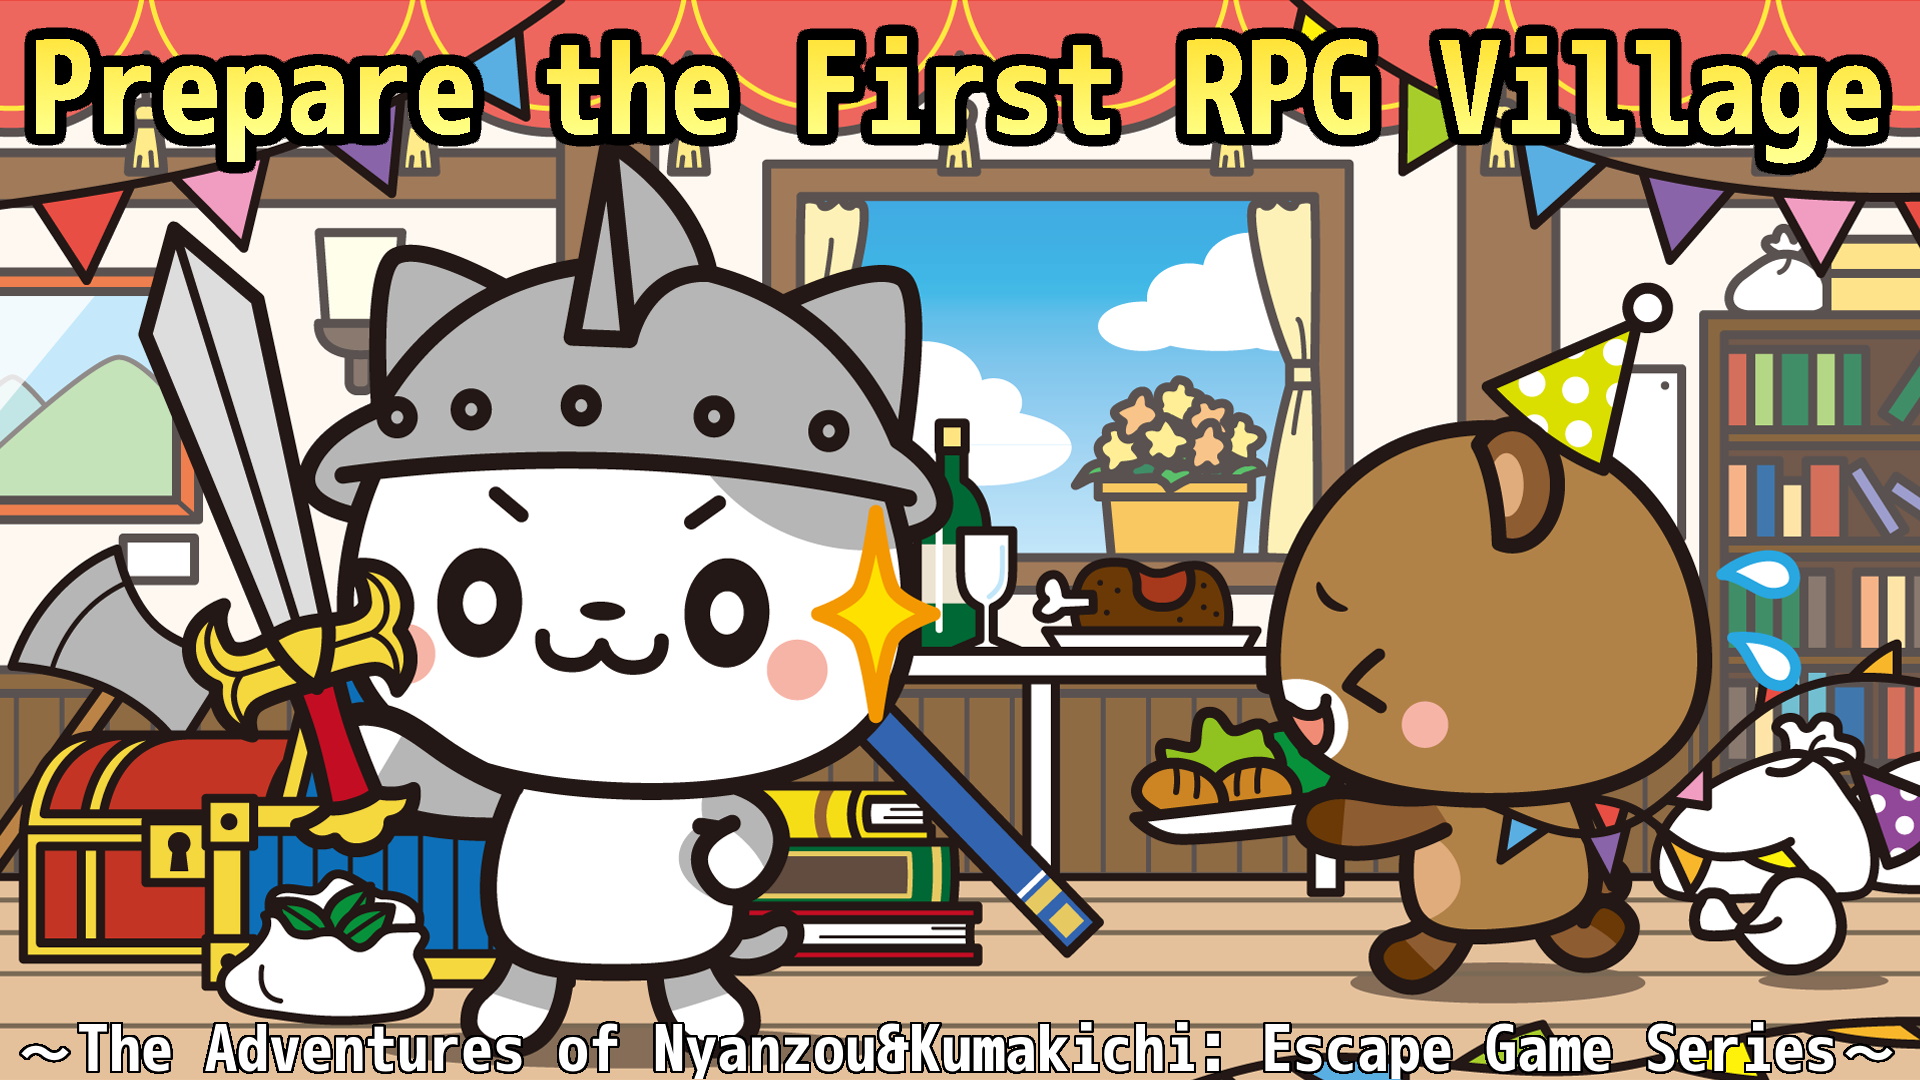 Prepare the First RPG Village
～The Adventures of Nyanzou&Kumakichi: Escape Game Series～